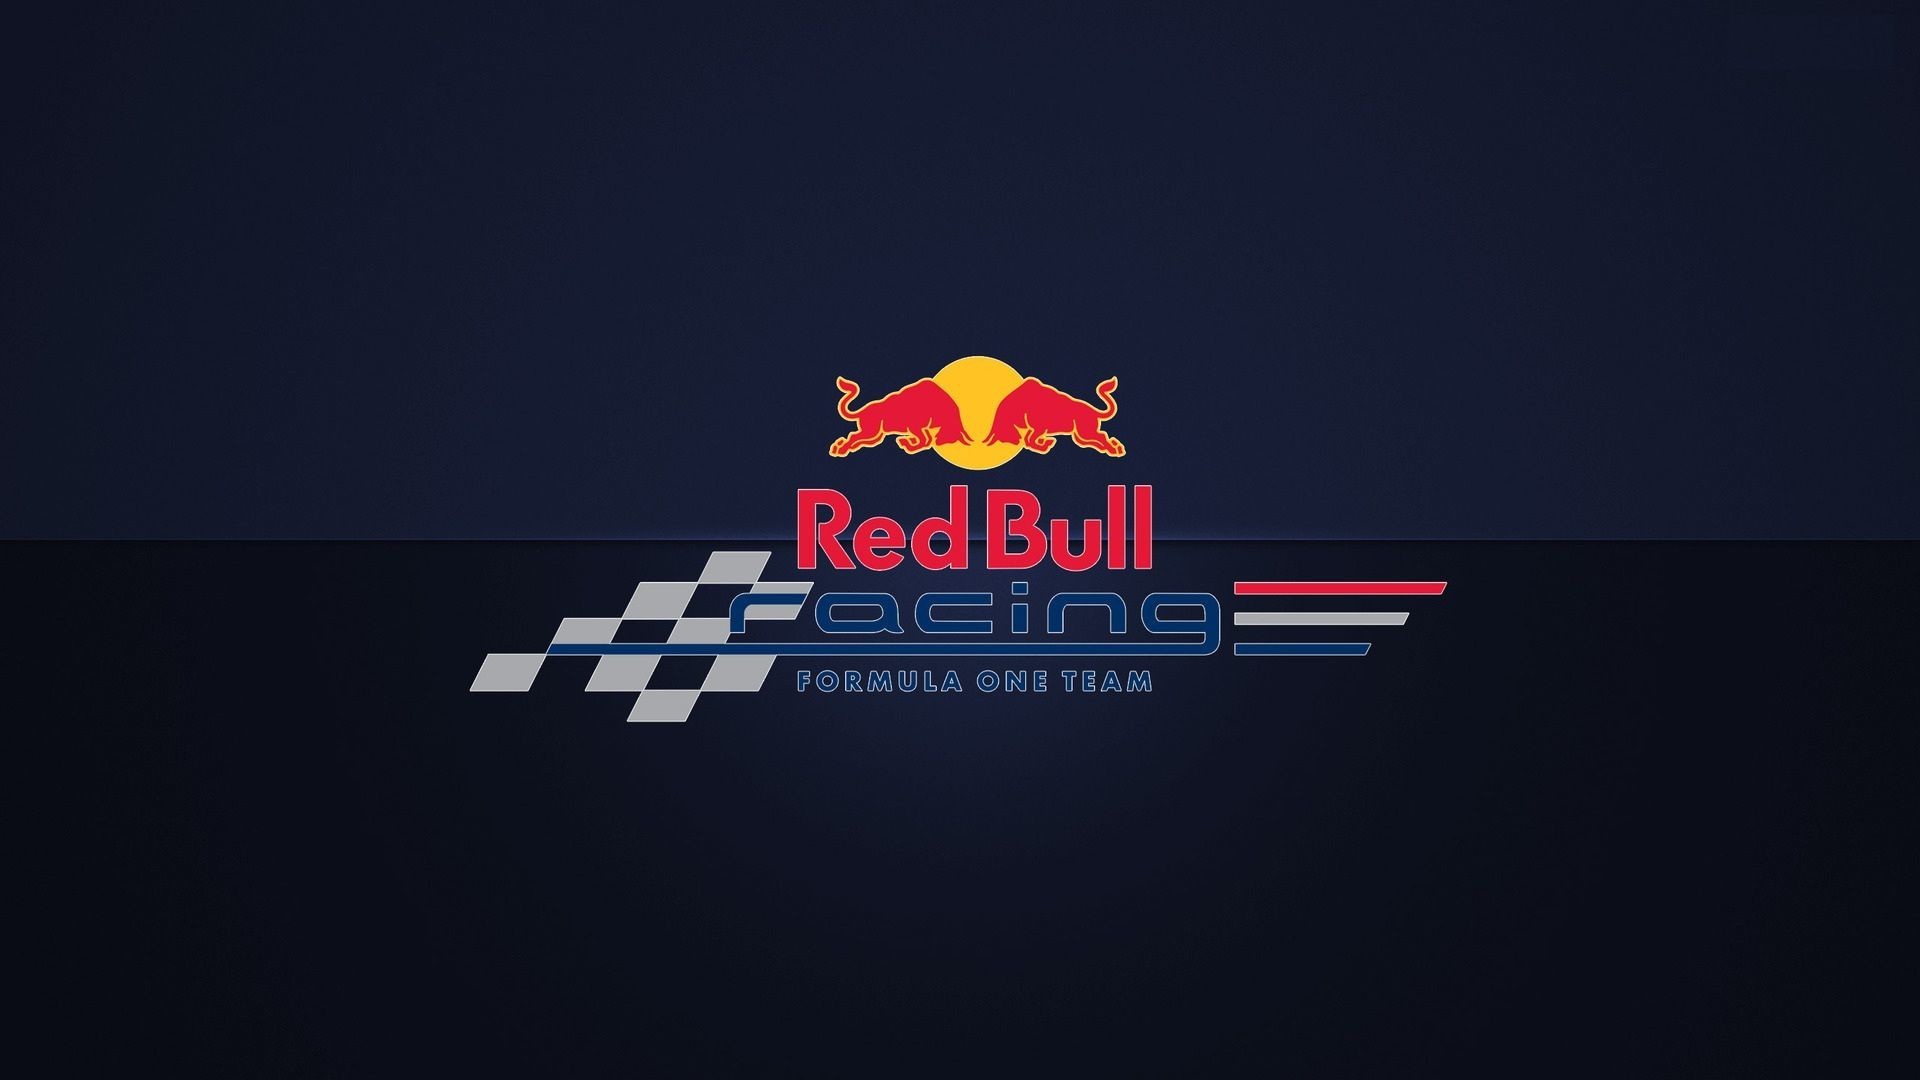 1920x1080  Red Bull Racing Formula One Logo Wallpapers | HD Wallpapers .